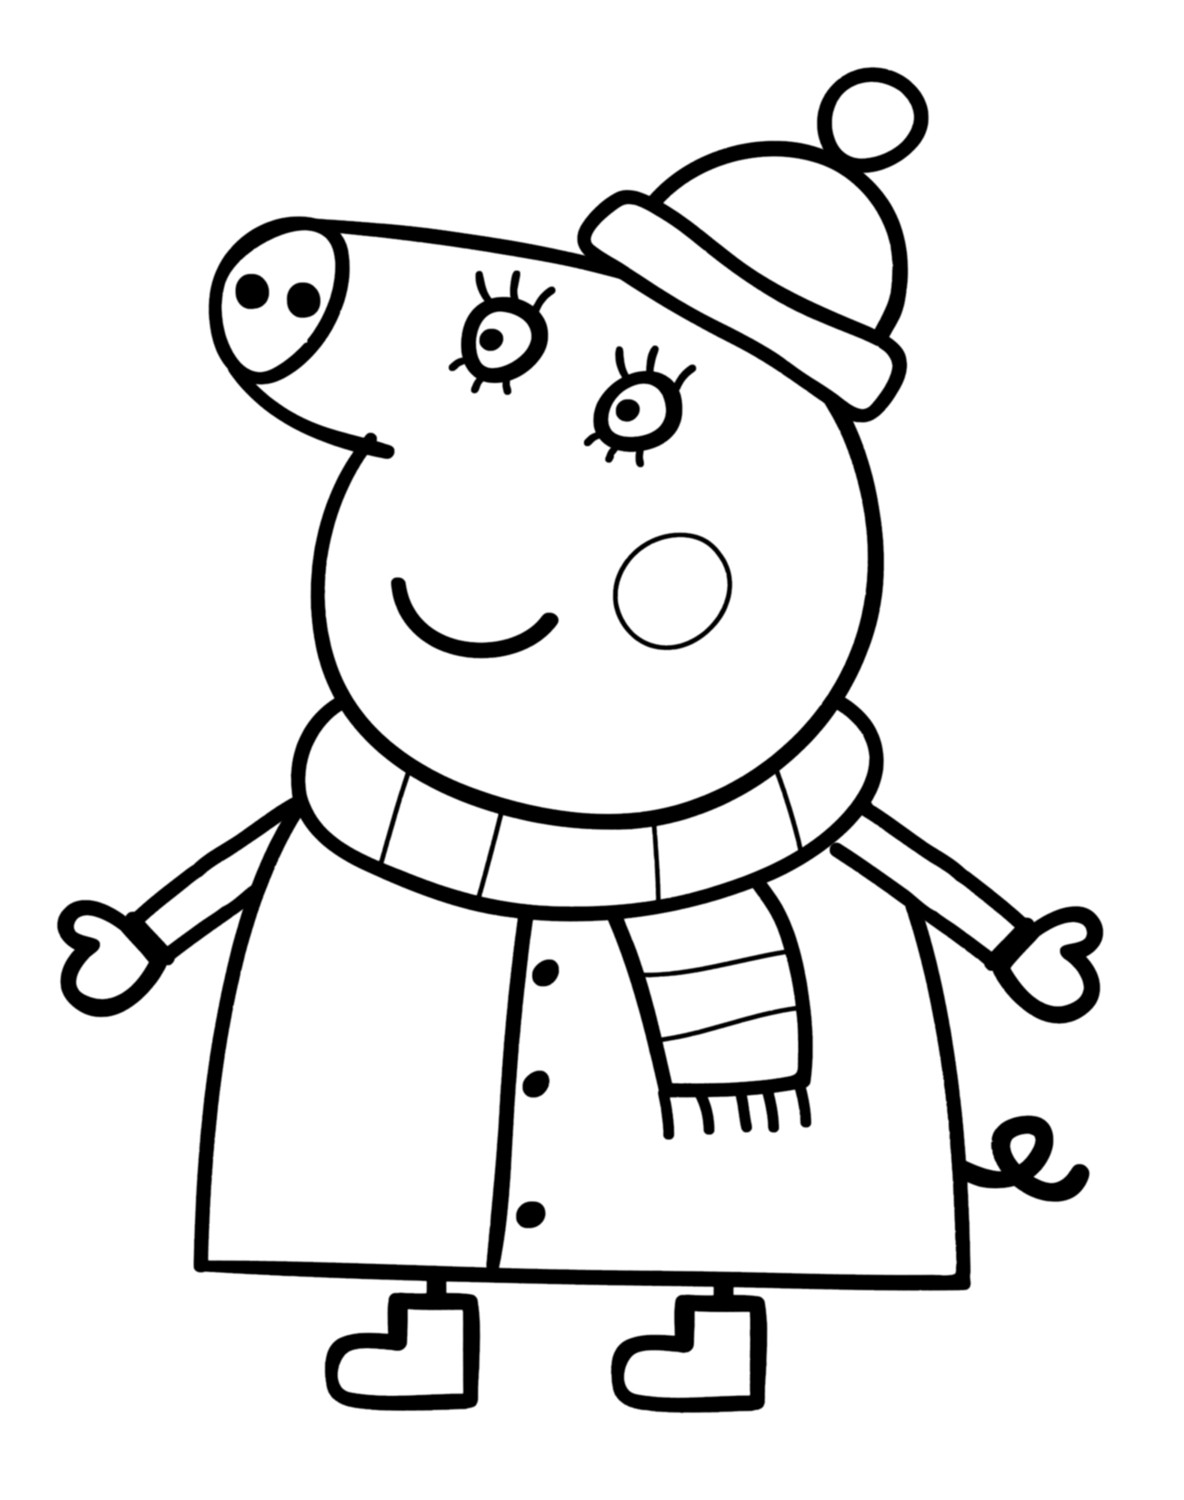 Free Printable Peppa Pig Coloring Pages
 FUN & LEARN Free worksheets for kid Peppa Pig Coloring